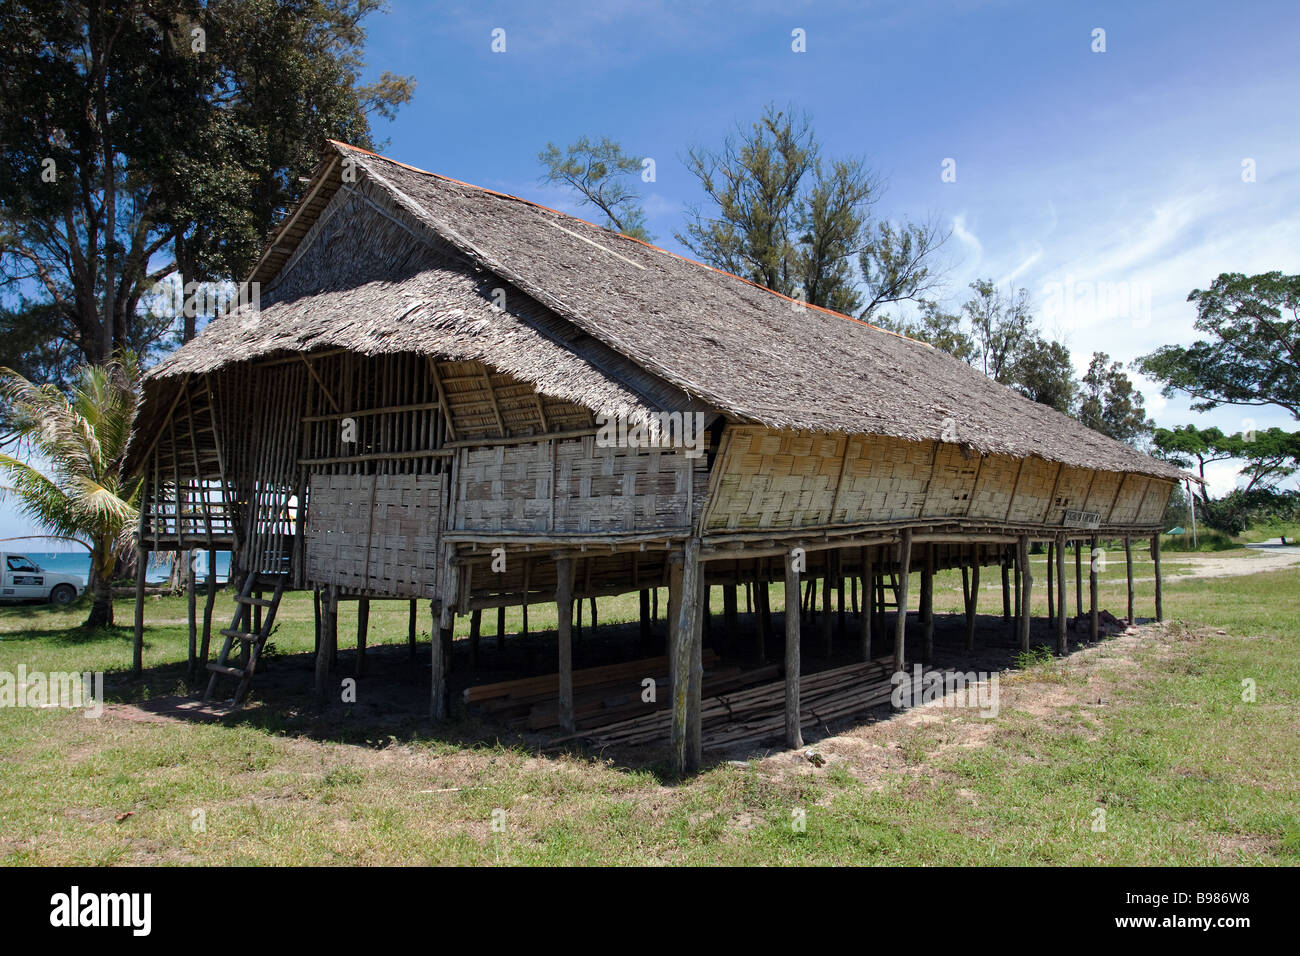 Rungus style longhouse built near the beach at the Tip of Borneo Kudat to accommodate tourists and visitors Stock Photo